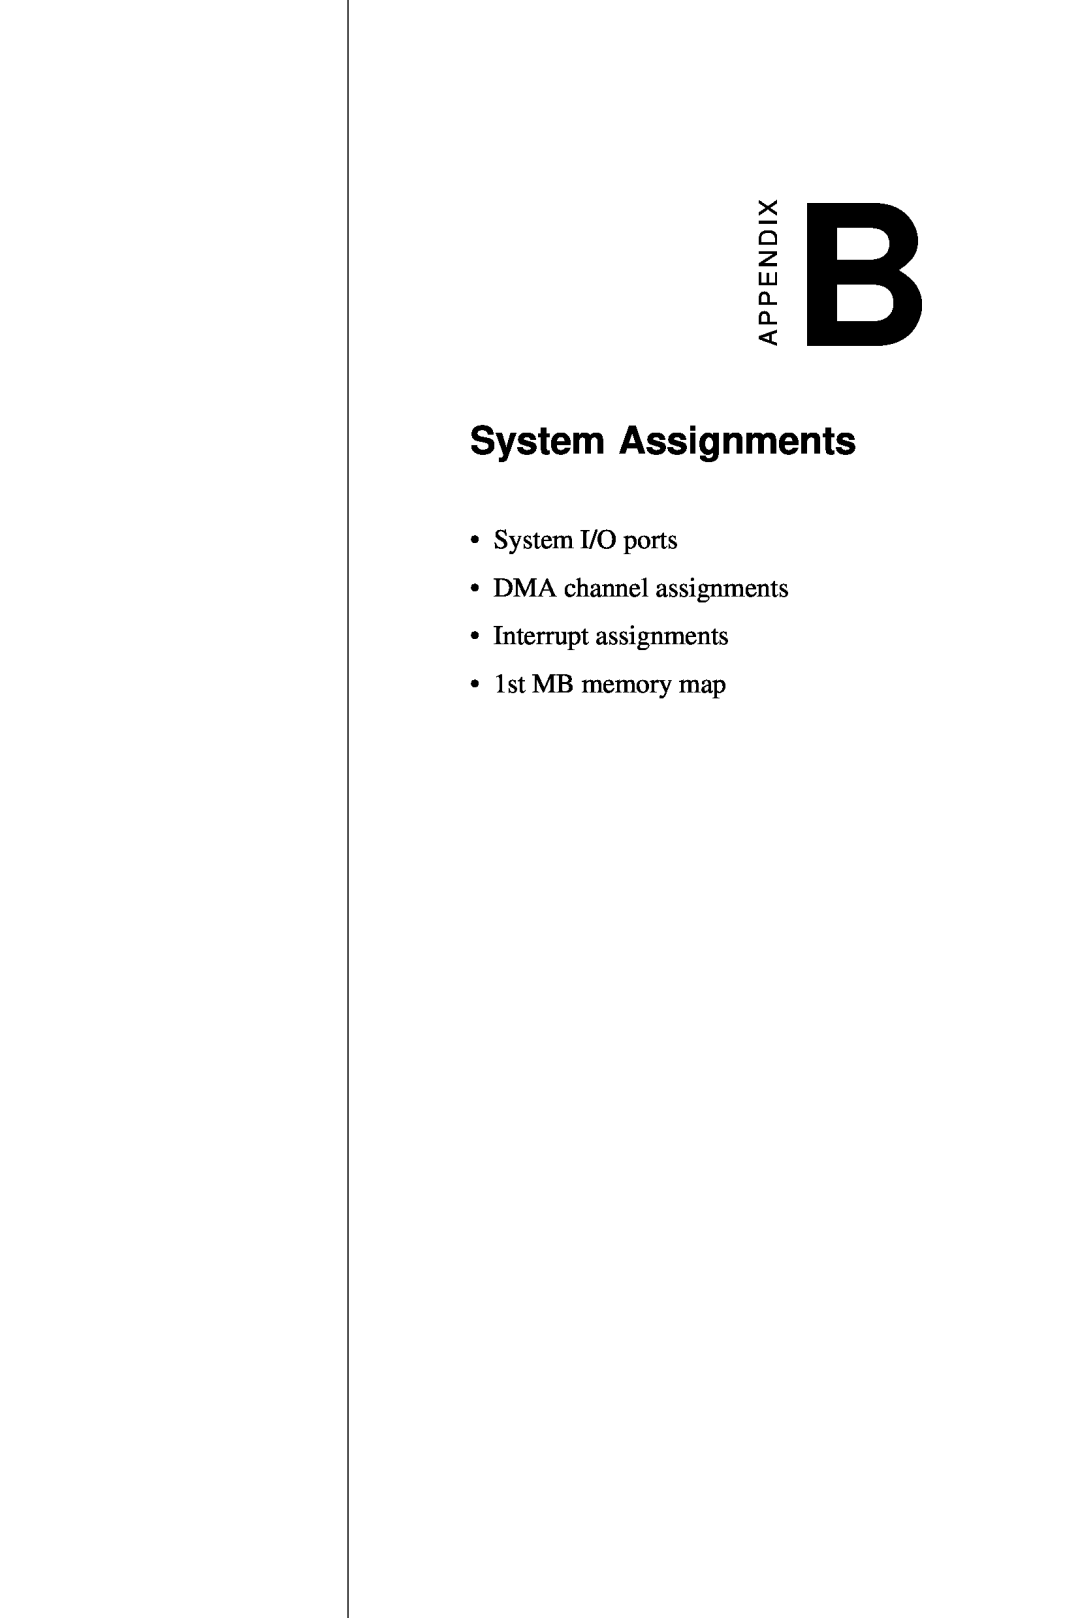 AMD PCM-5820 manual System Assignments 